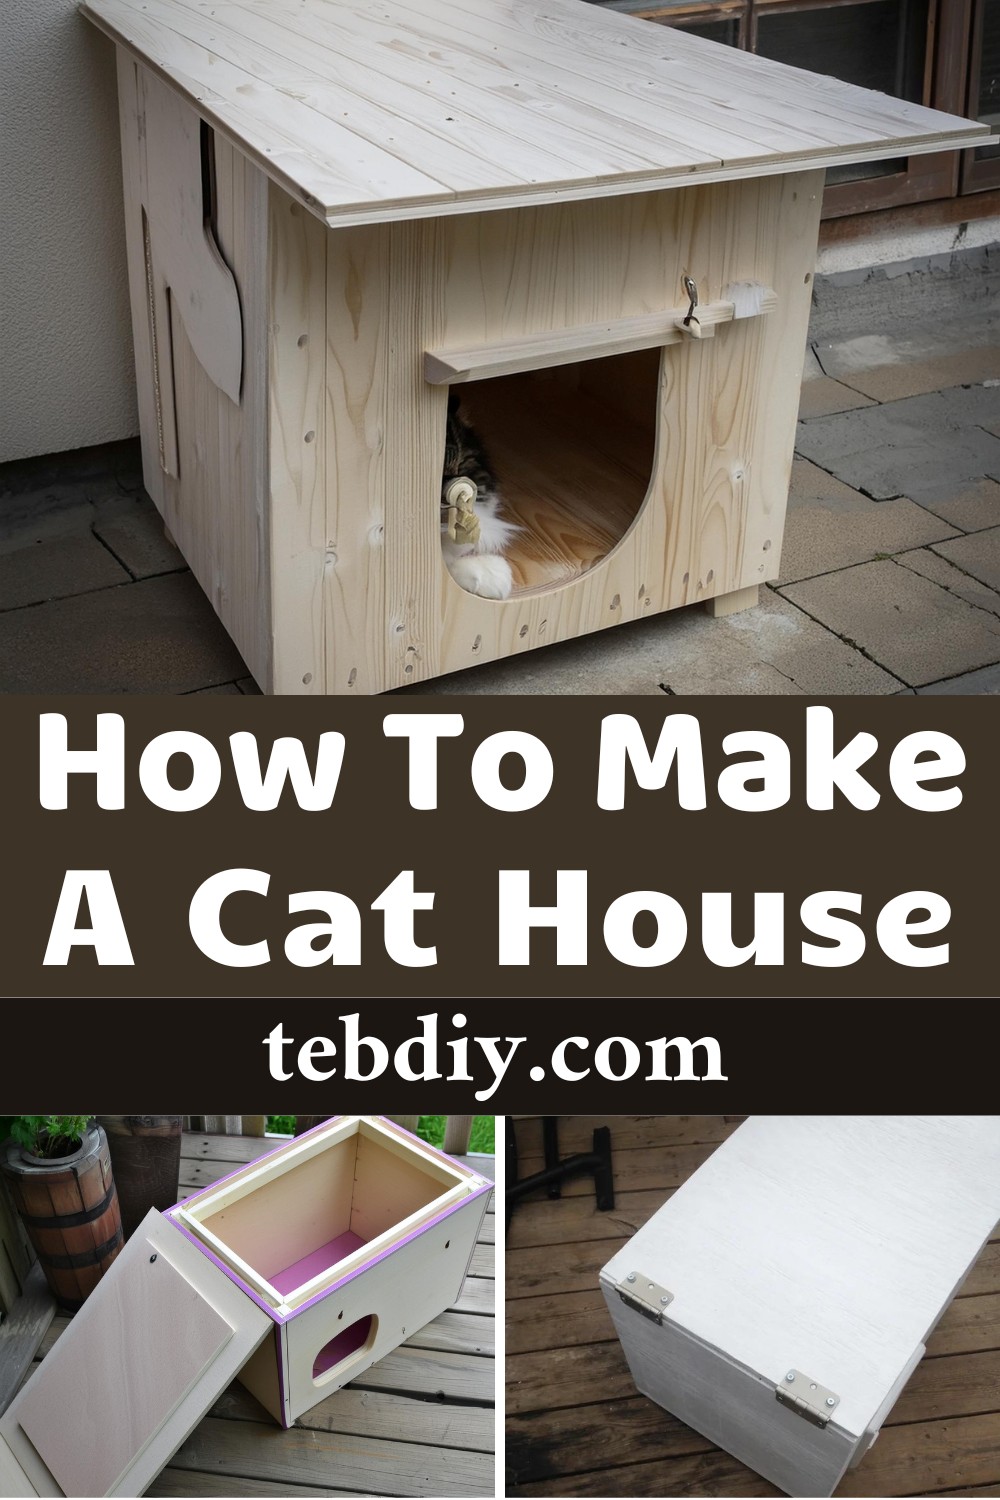 How To Make A Cat House For The Winter